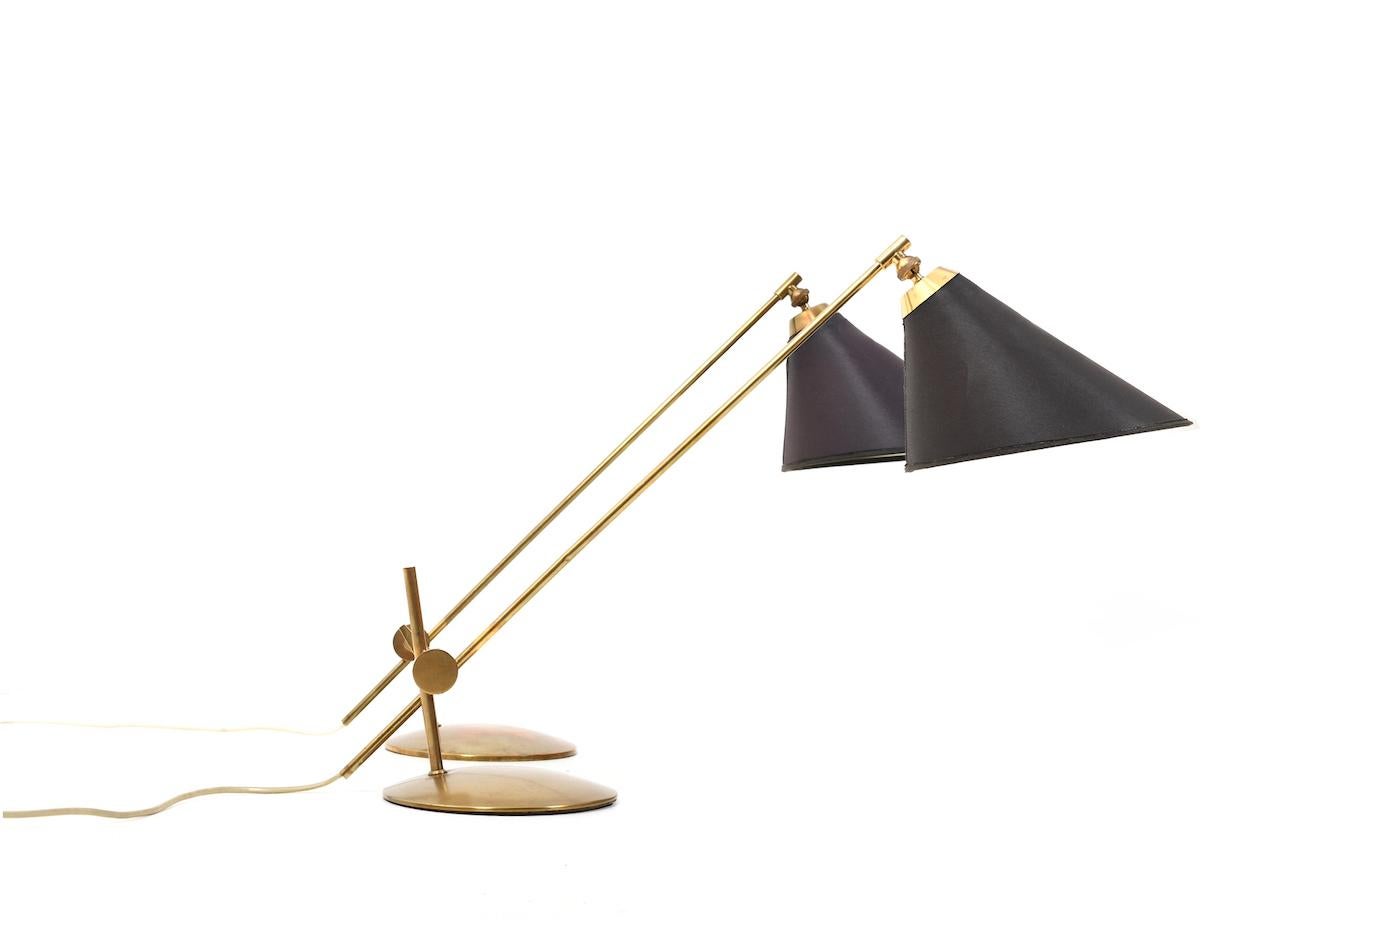 Pair of adjustable table lamps, designed esigned by Th. Valentiner 1950s. Made in brass by Poul Dinesen Denmark in 1950s. Model 